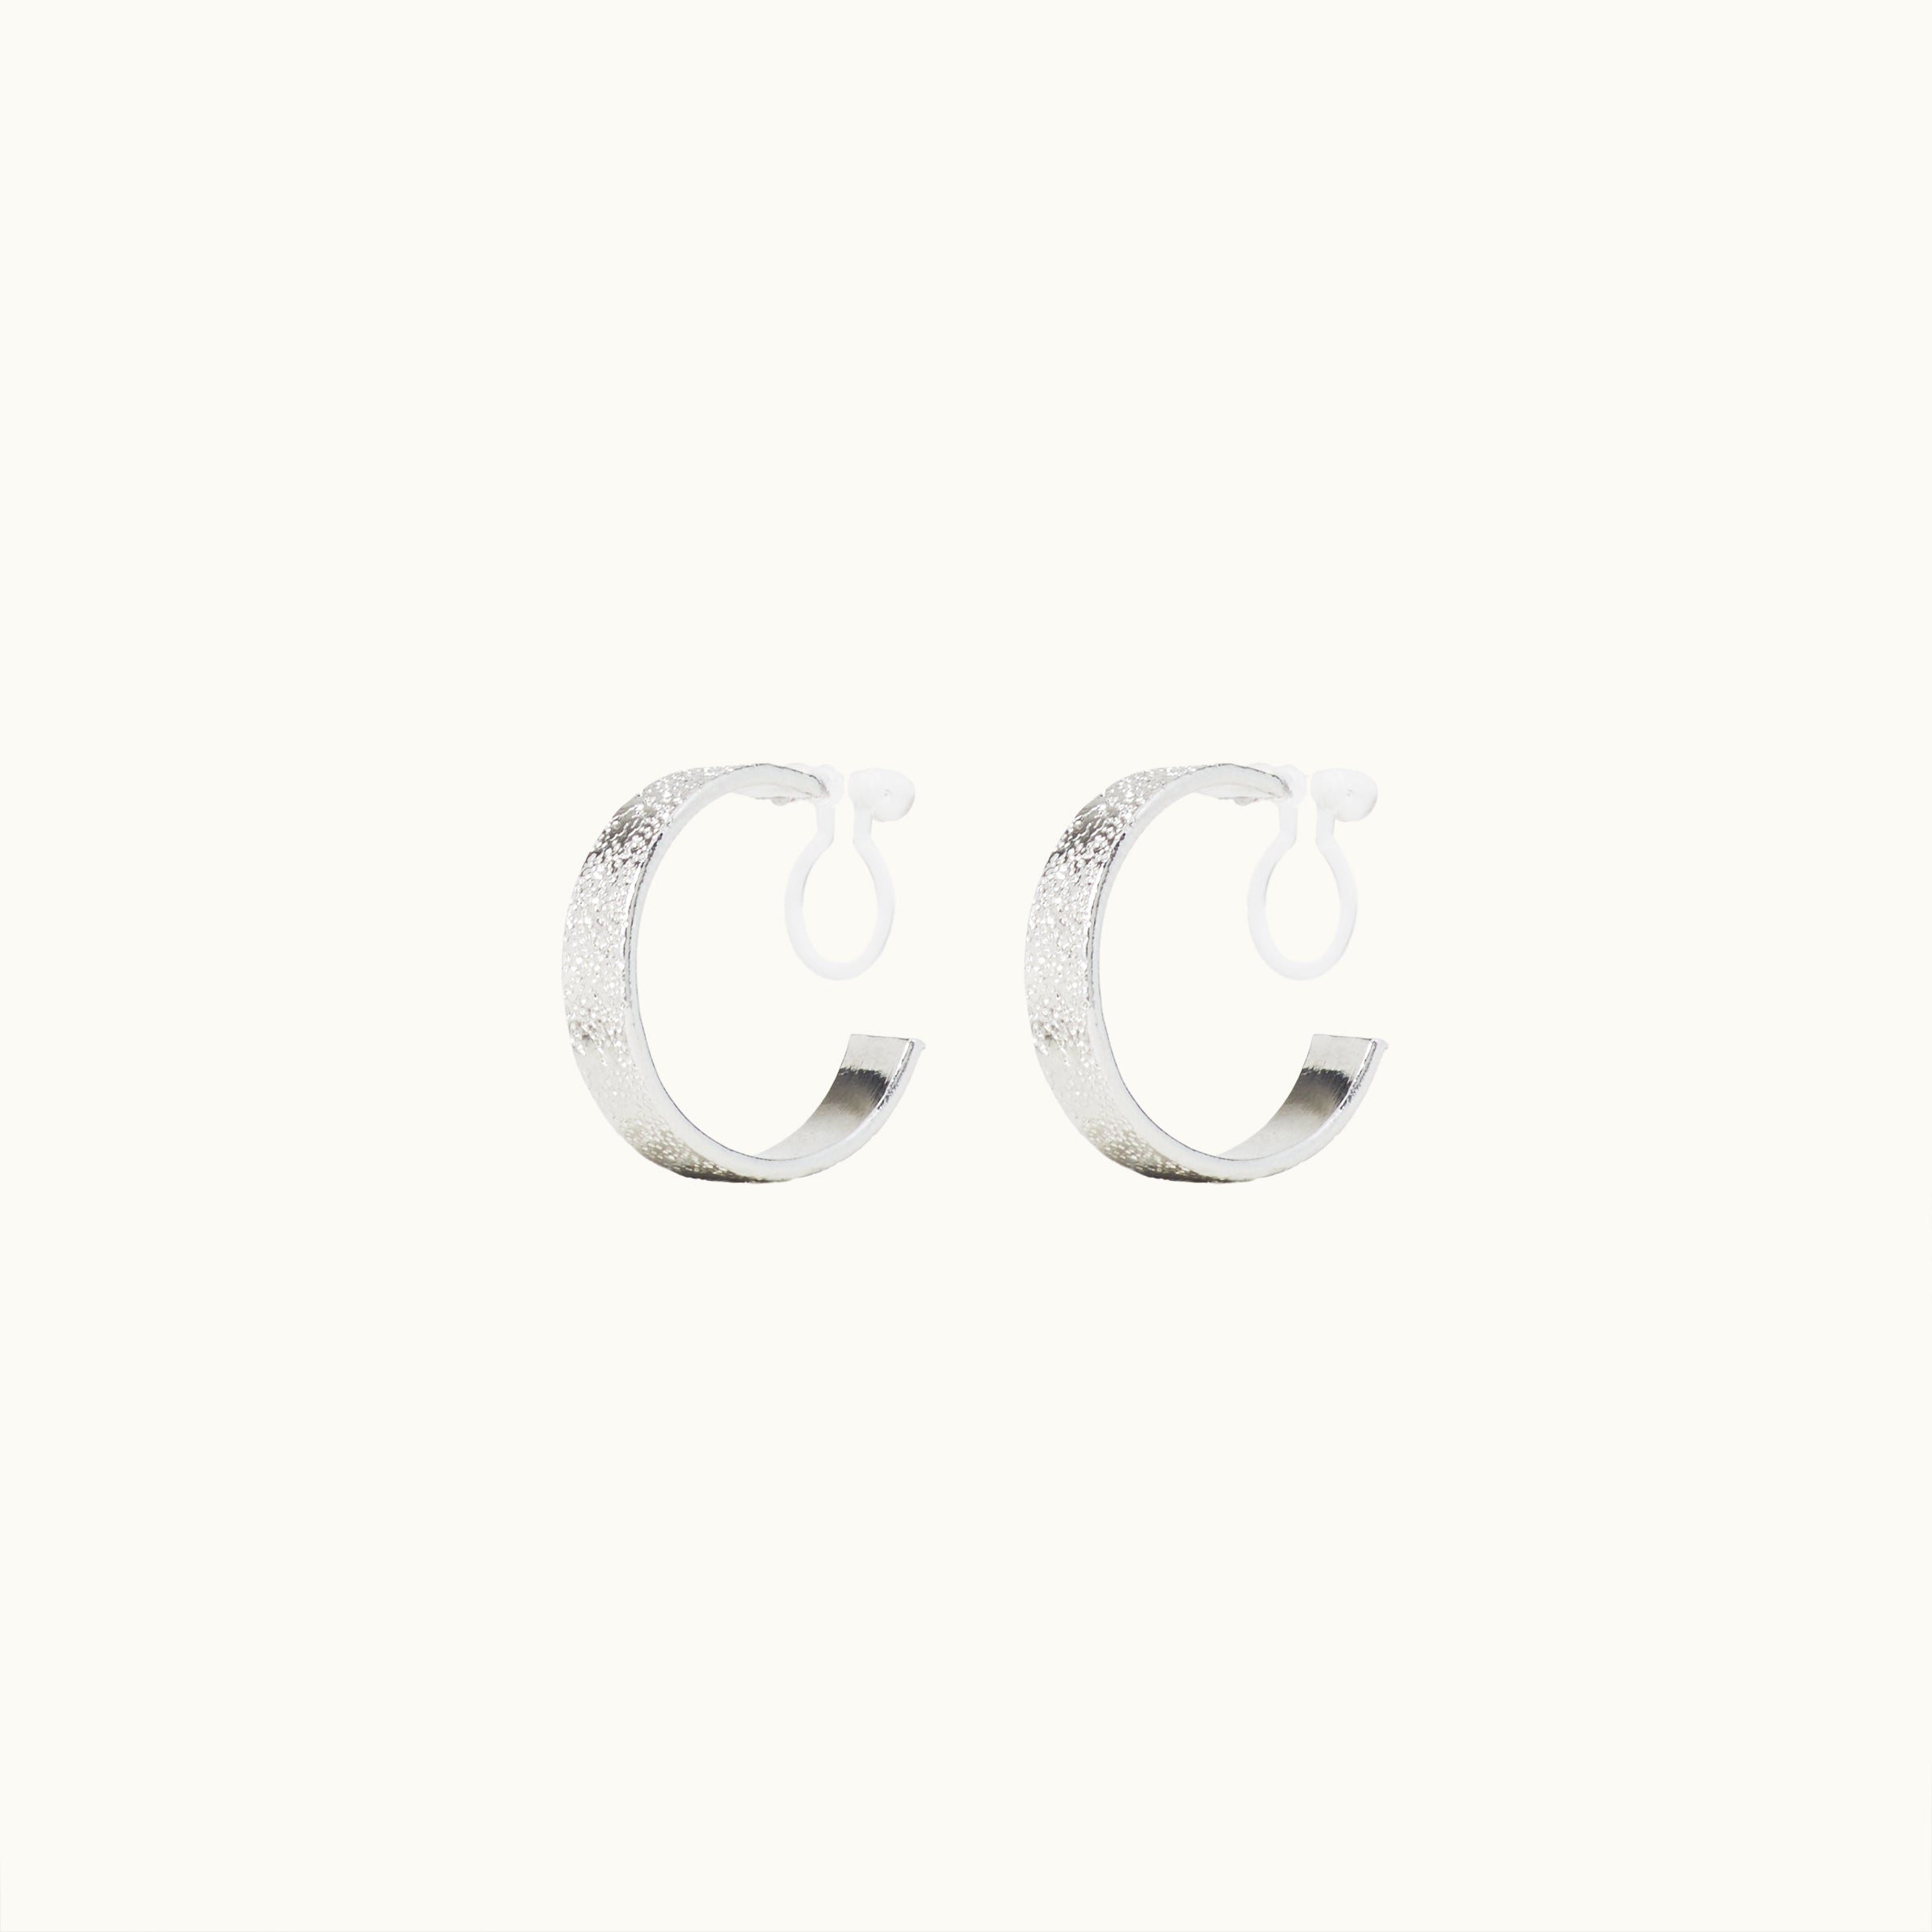 Image of the Speckled Hoop Clip On Earrings in Silver offer versatility and comfort for a range of ear sizes and sensitivities. With a medium secure hold, you can confidently wear them for 8-12 hours. Sold as a pair.